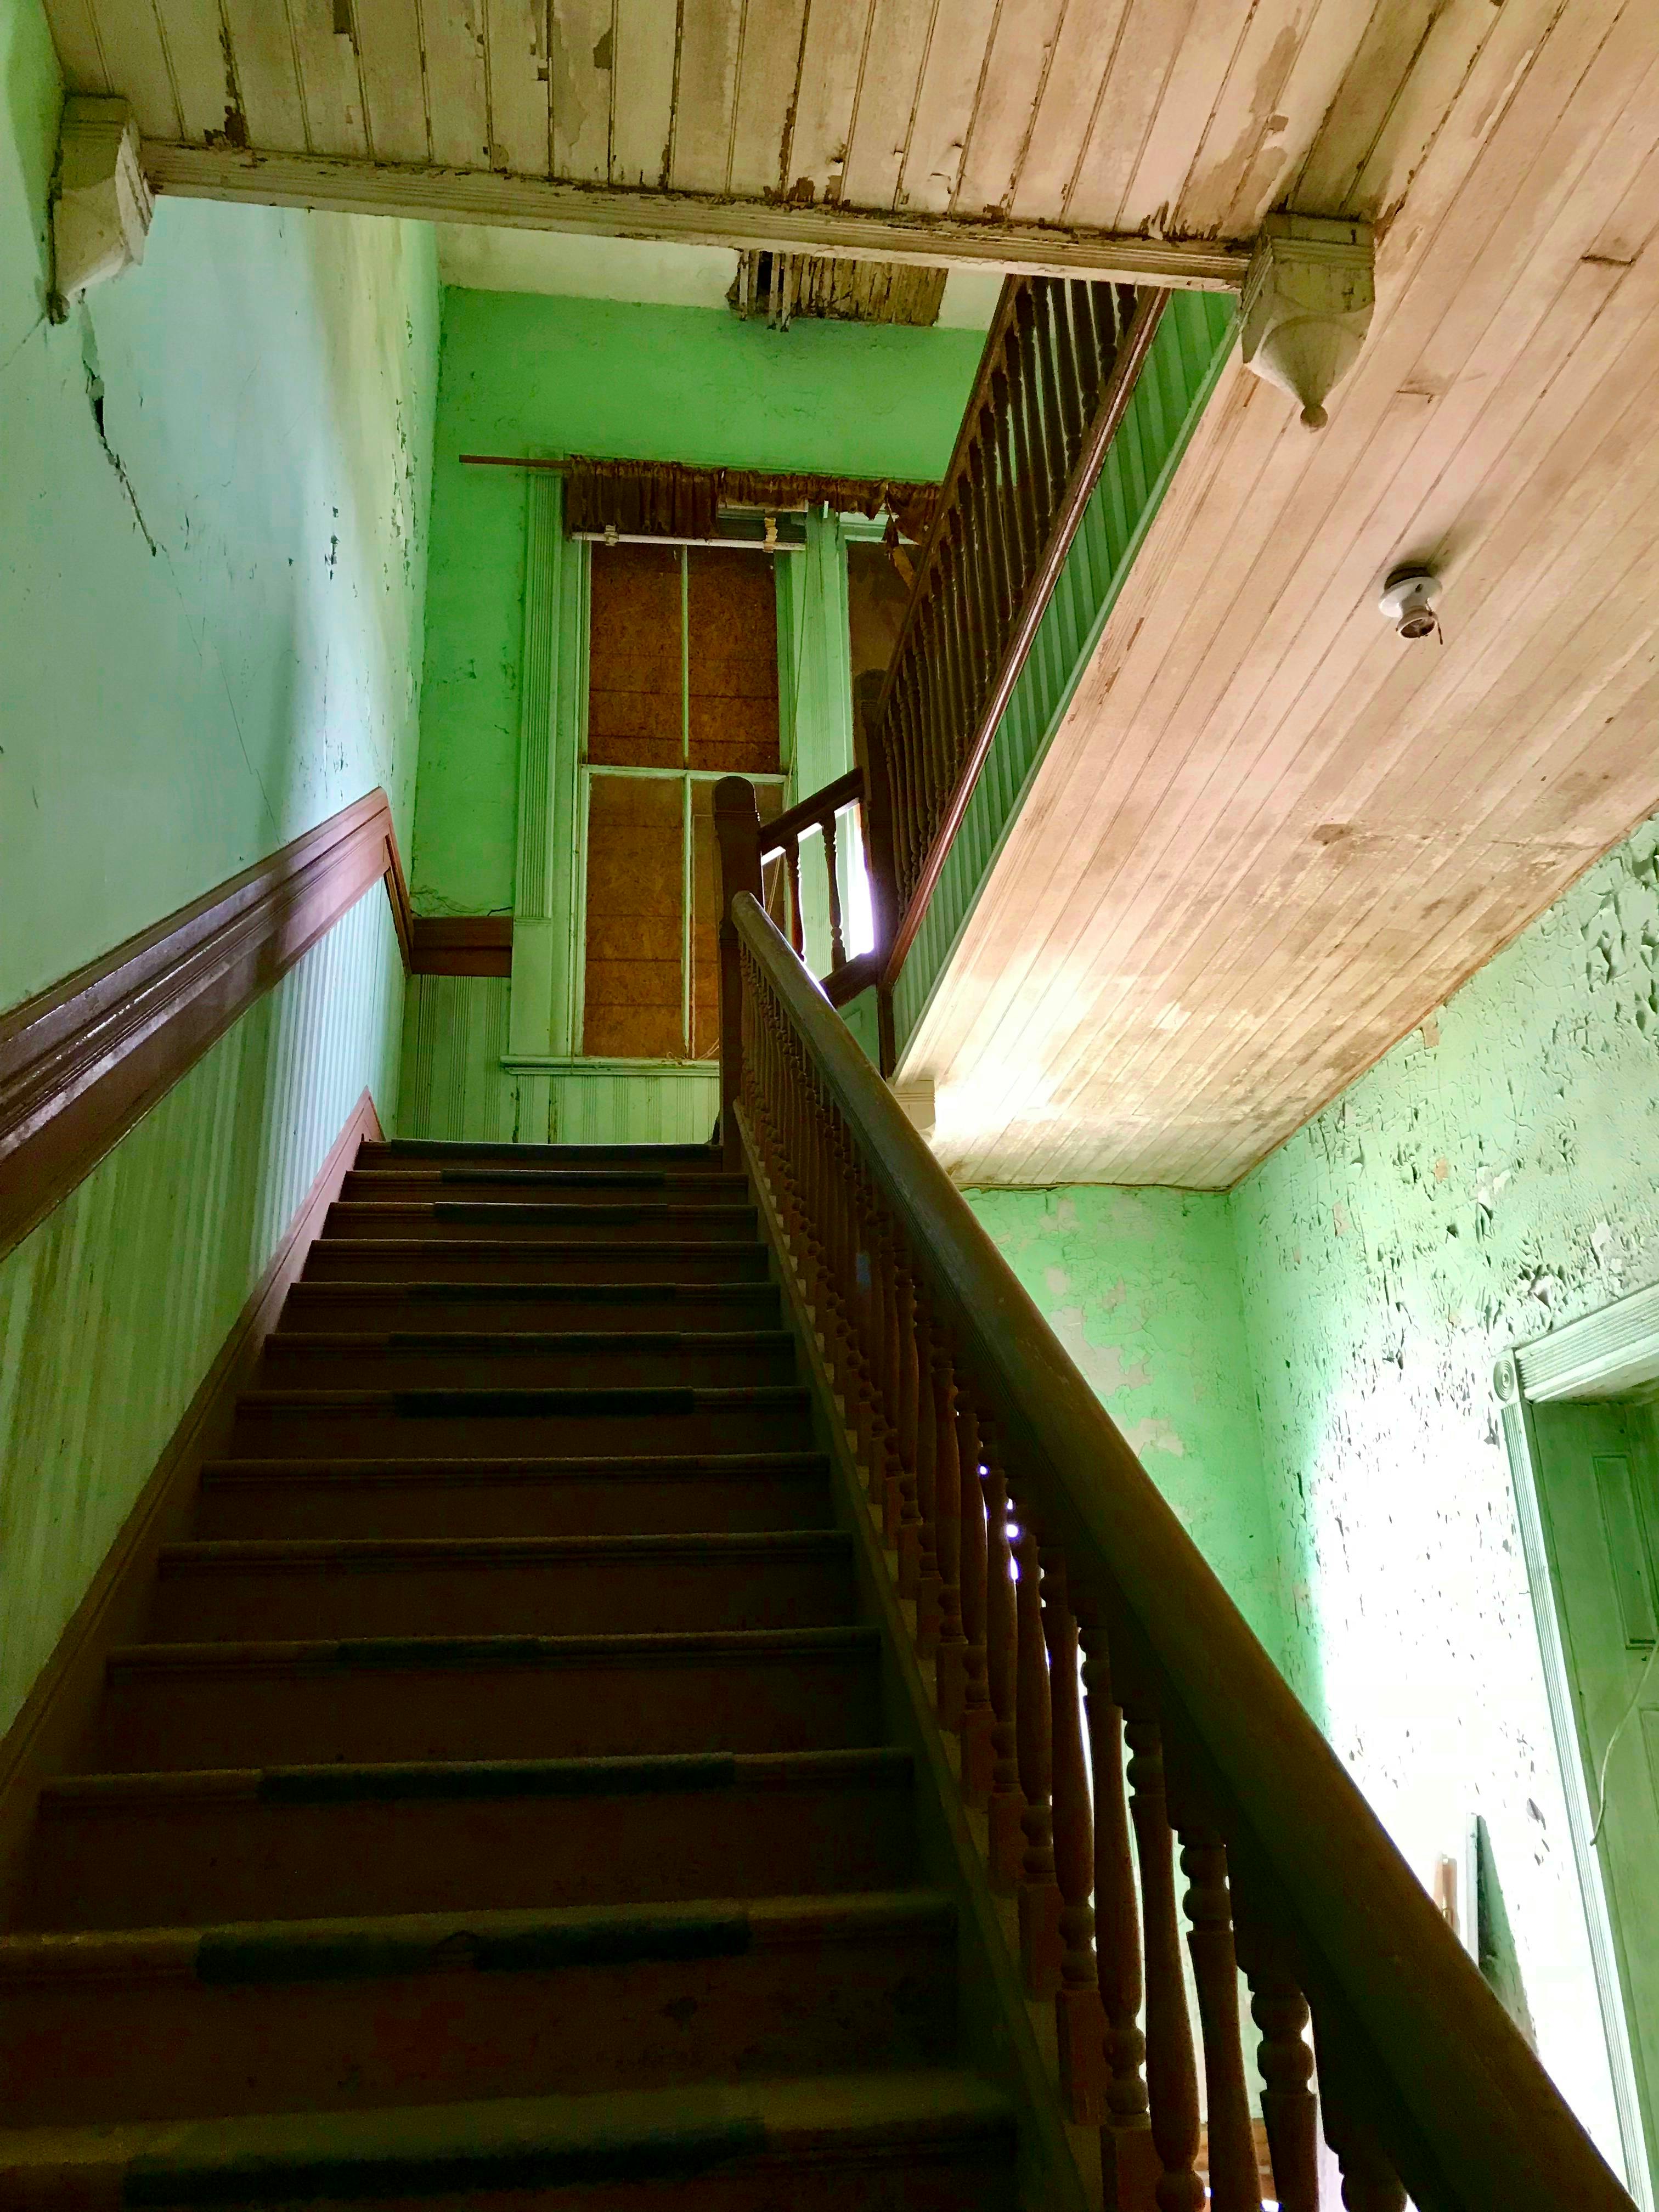 Free stock photo of abandoned building, green paint, Old hotel